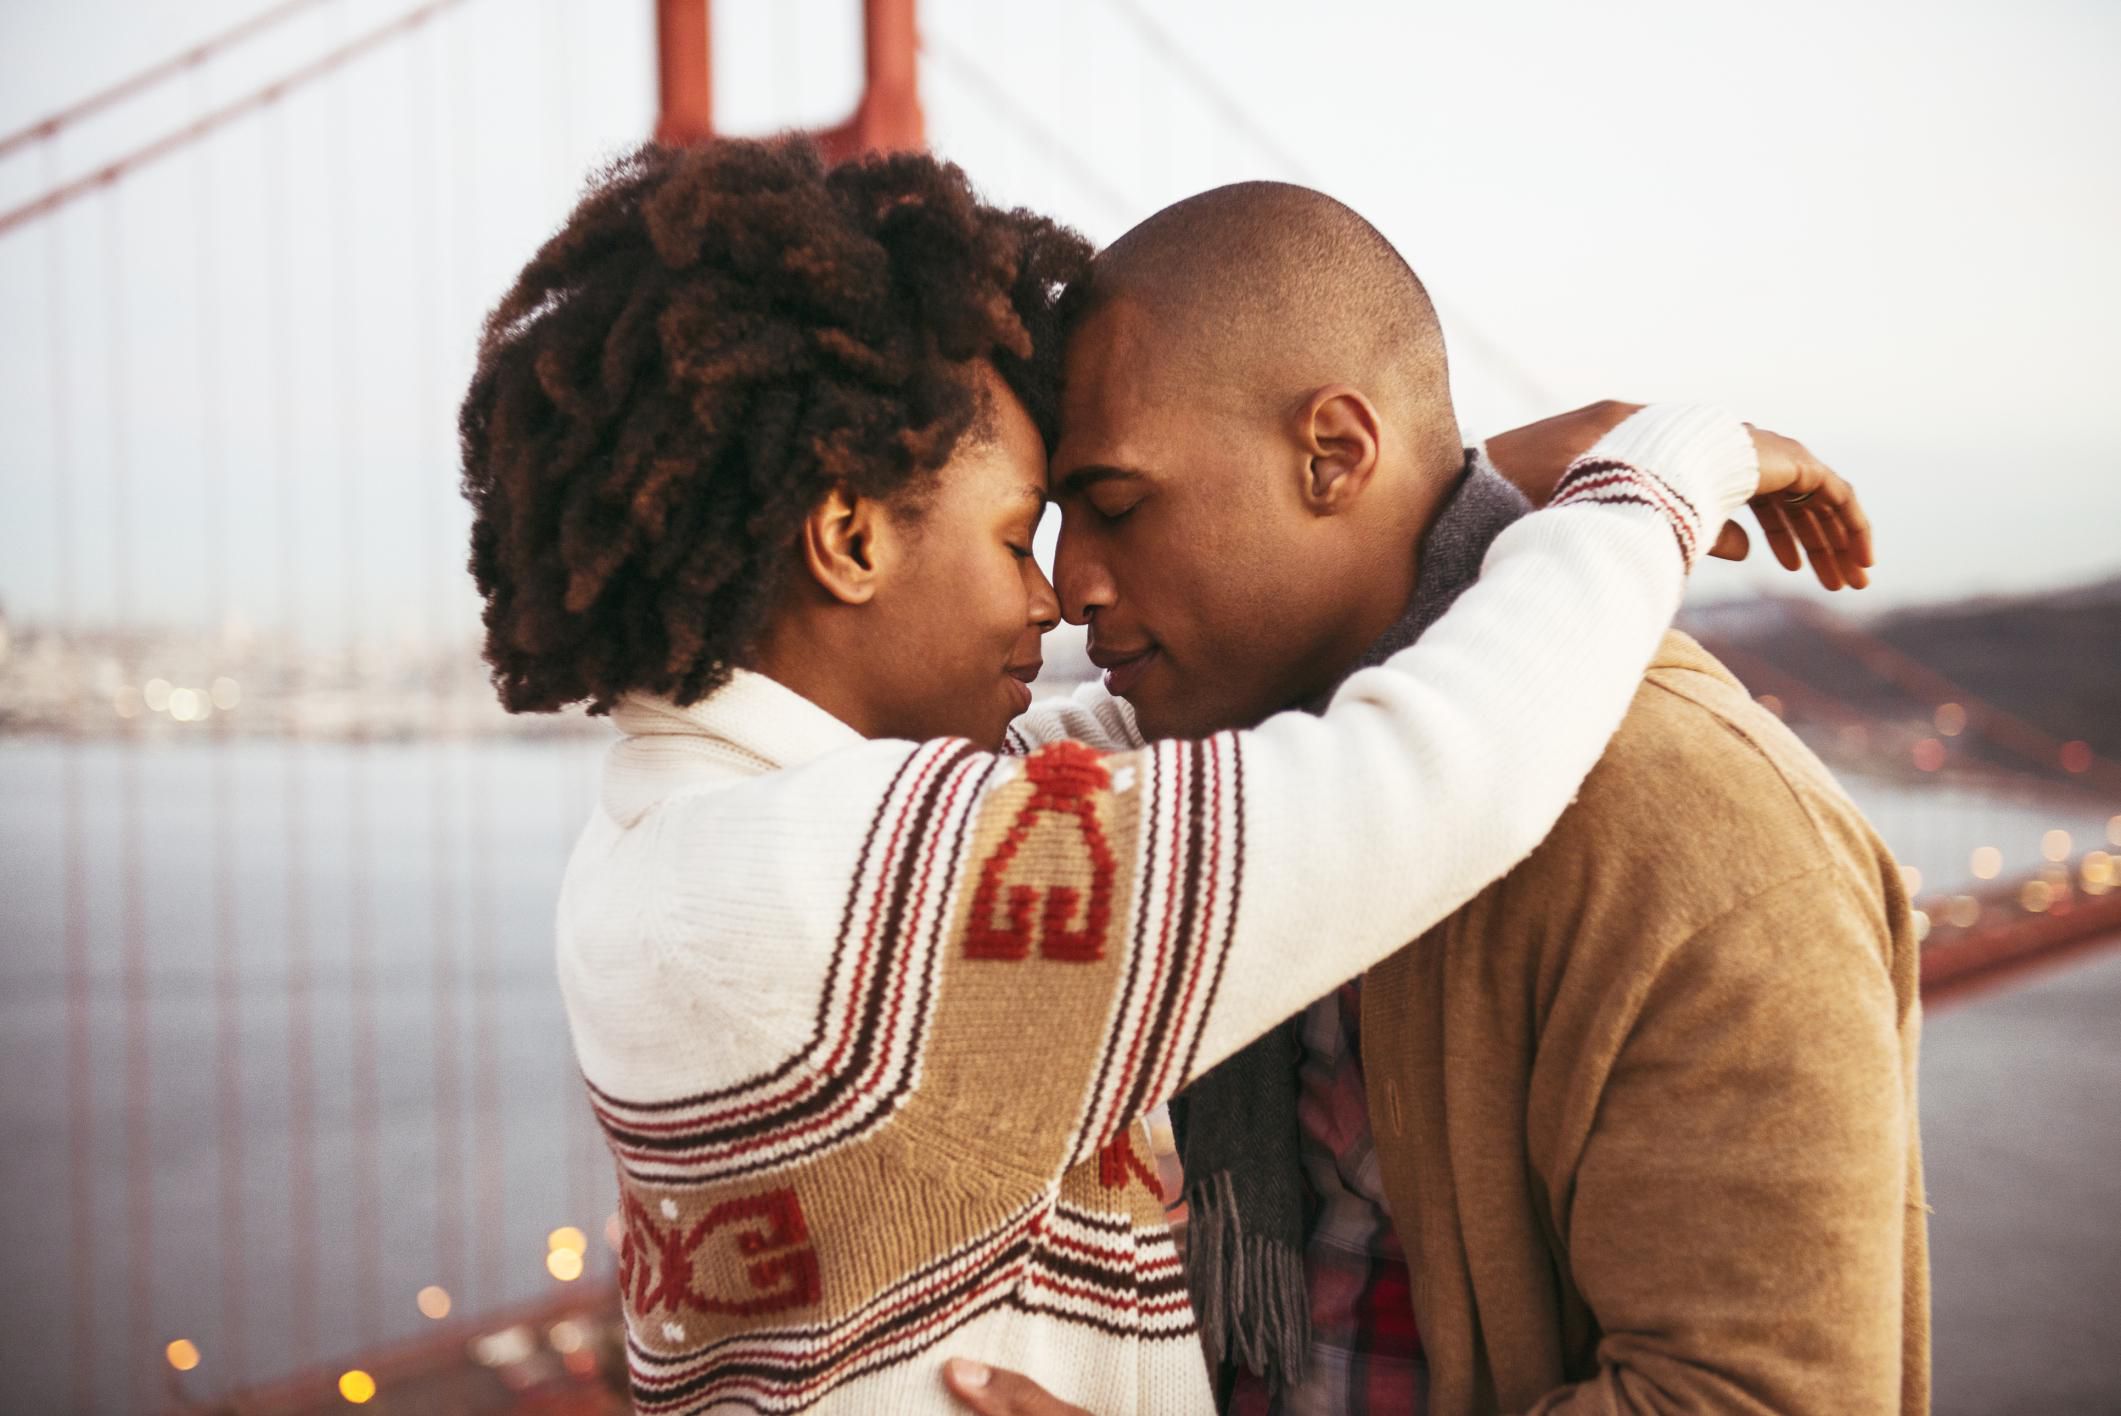 Tender Love Quotes that Describe You and Your Partner